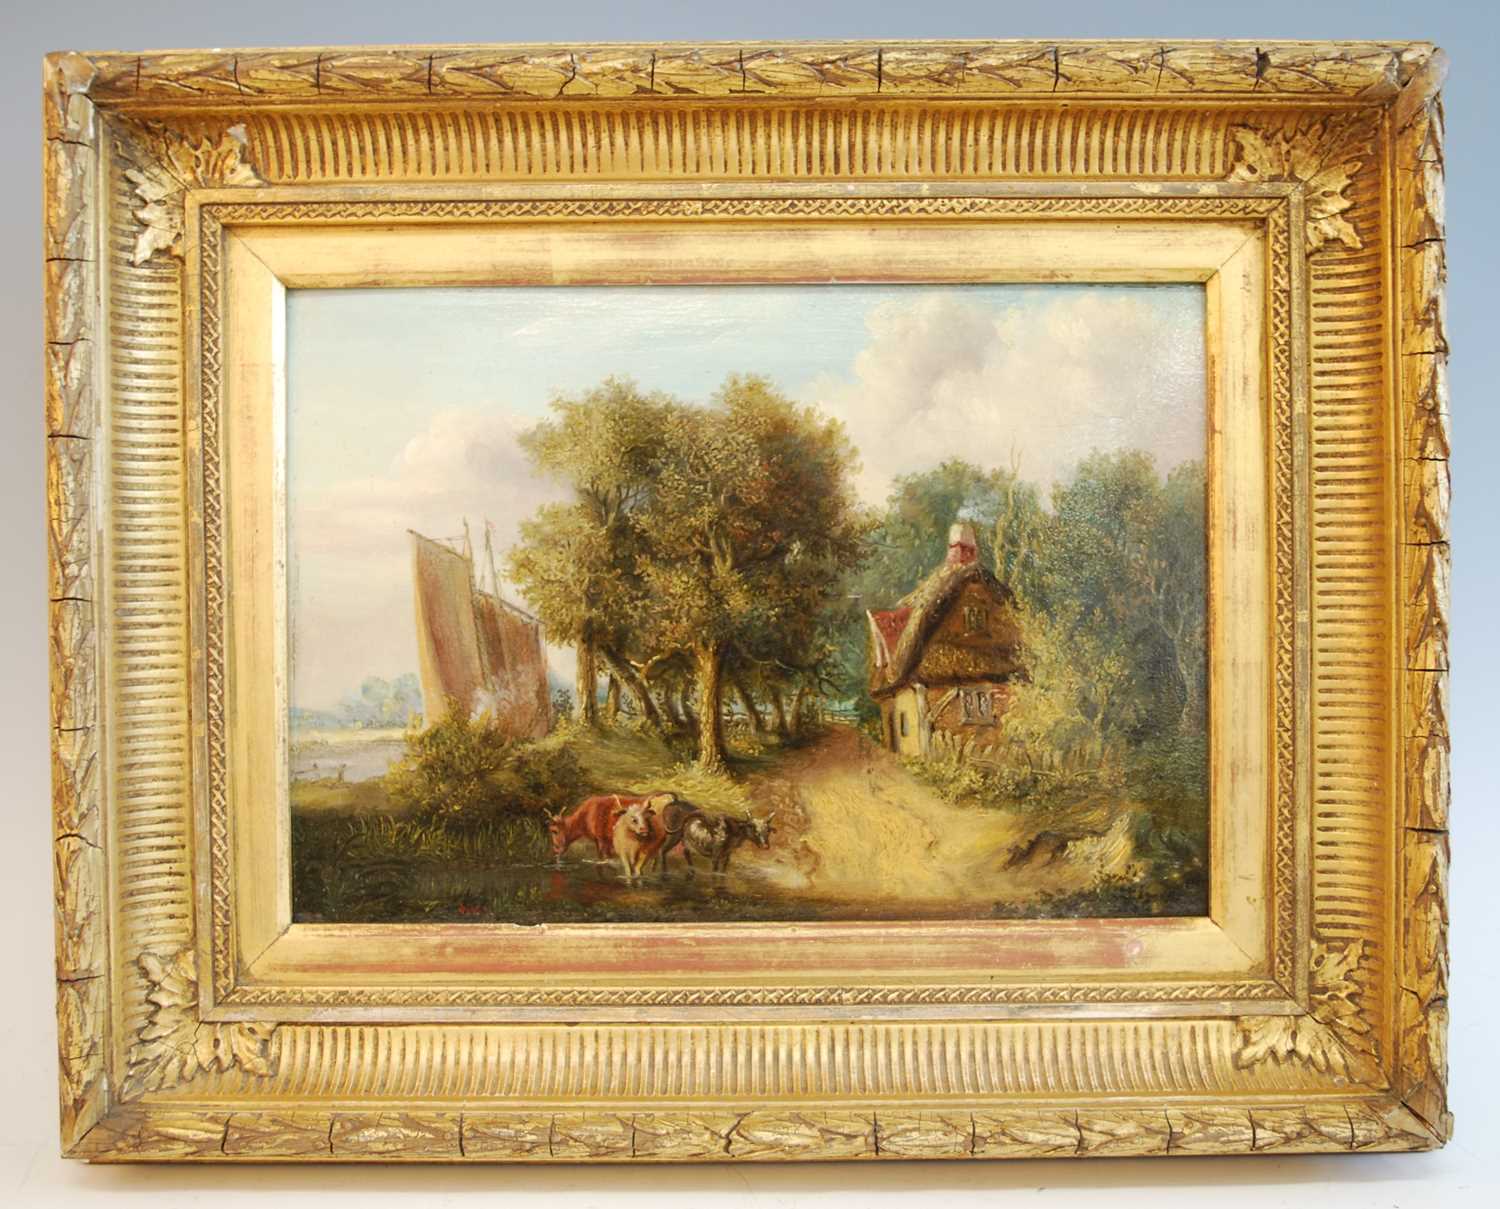 19th century Norwich school - Norfolk landscape with cattle watering and thatched cottage by a